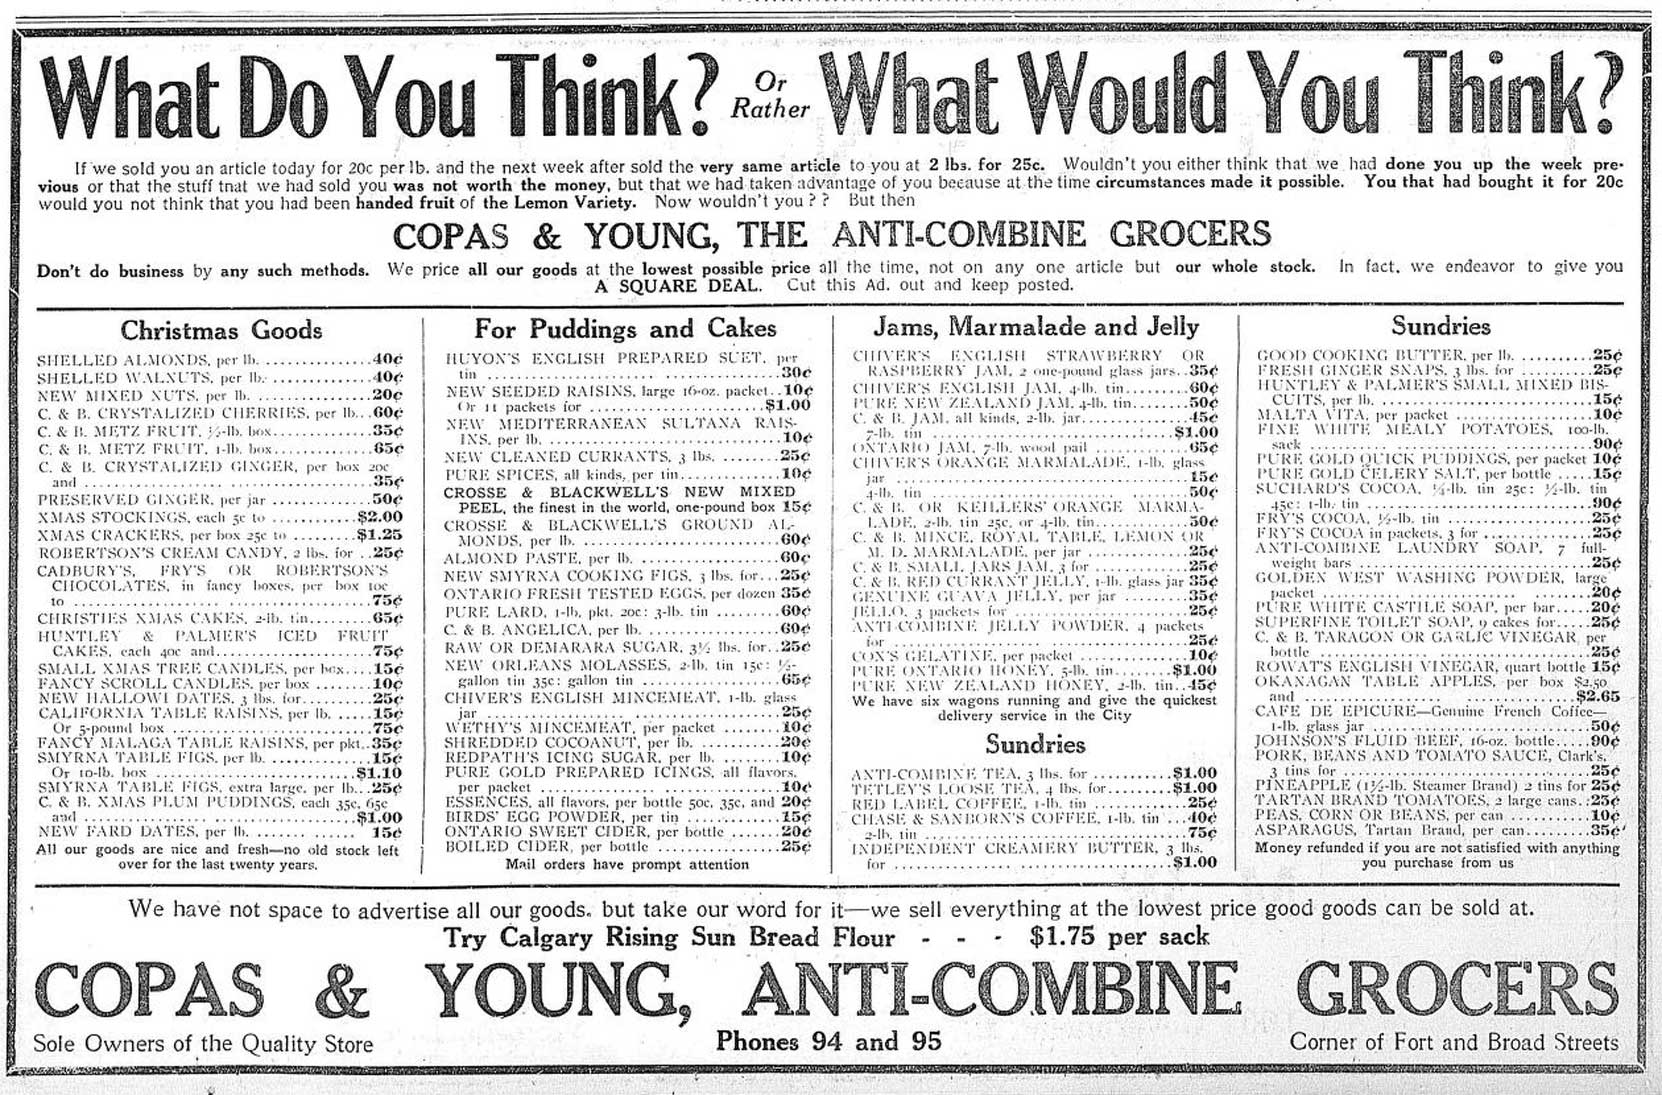 1909 advertisement for Copas & Young, Anti-Combine Grocers, in the Fell Building, Fort Street at Broad Street. (Victoria Online Sightseeing Tours collection)